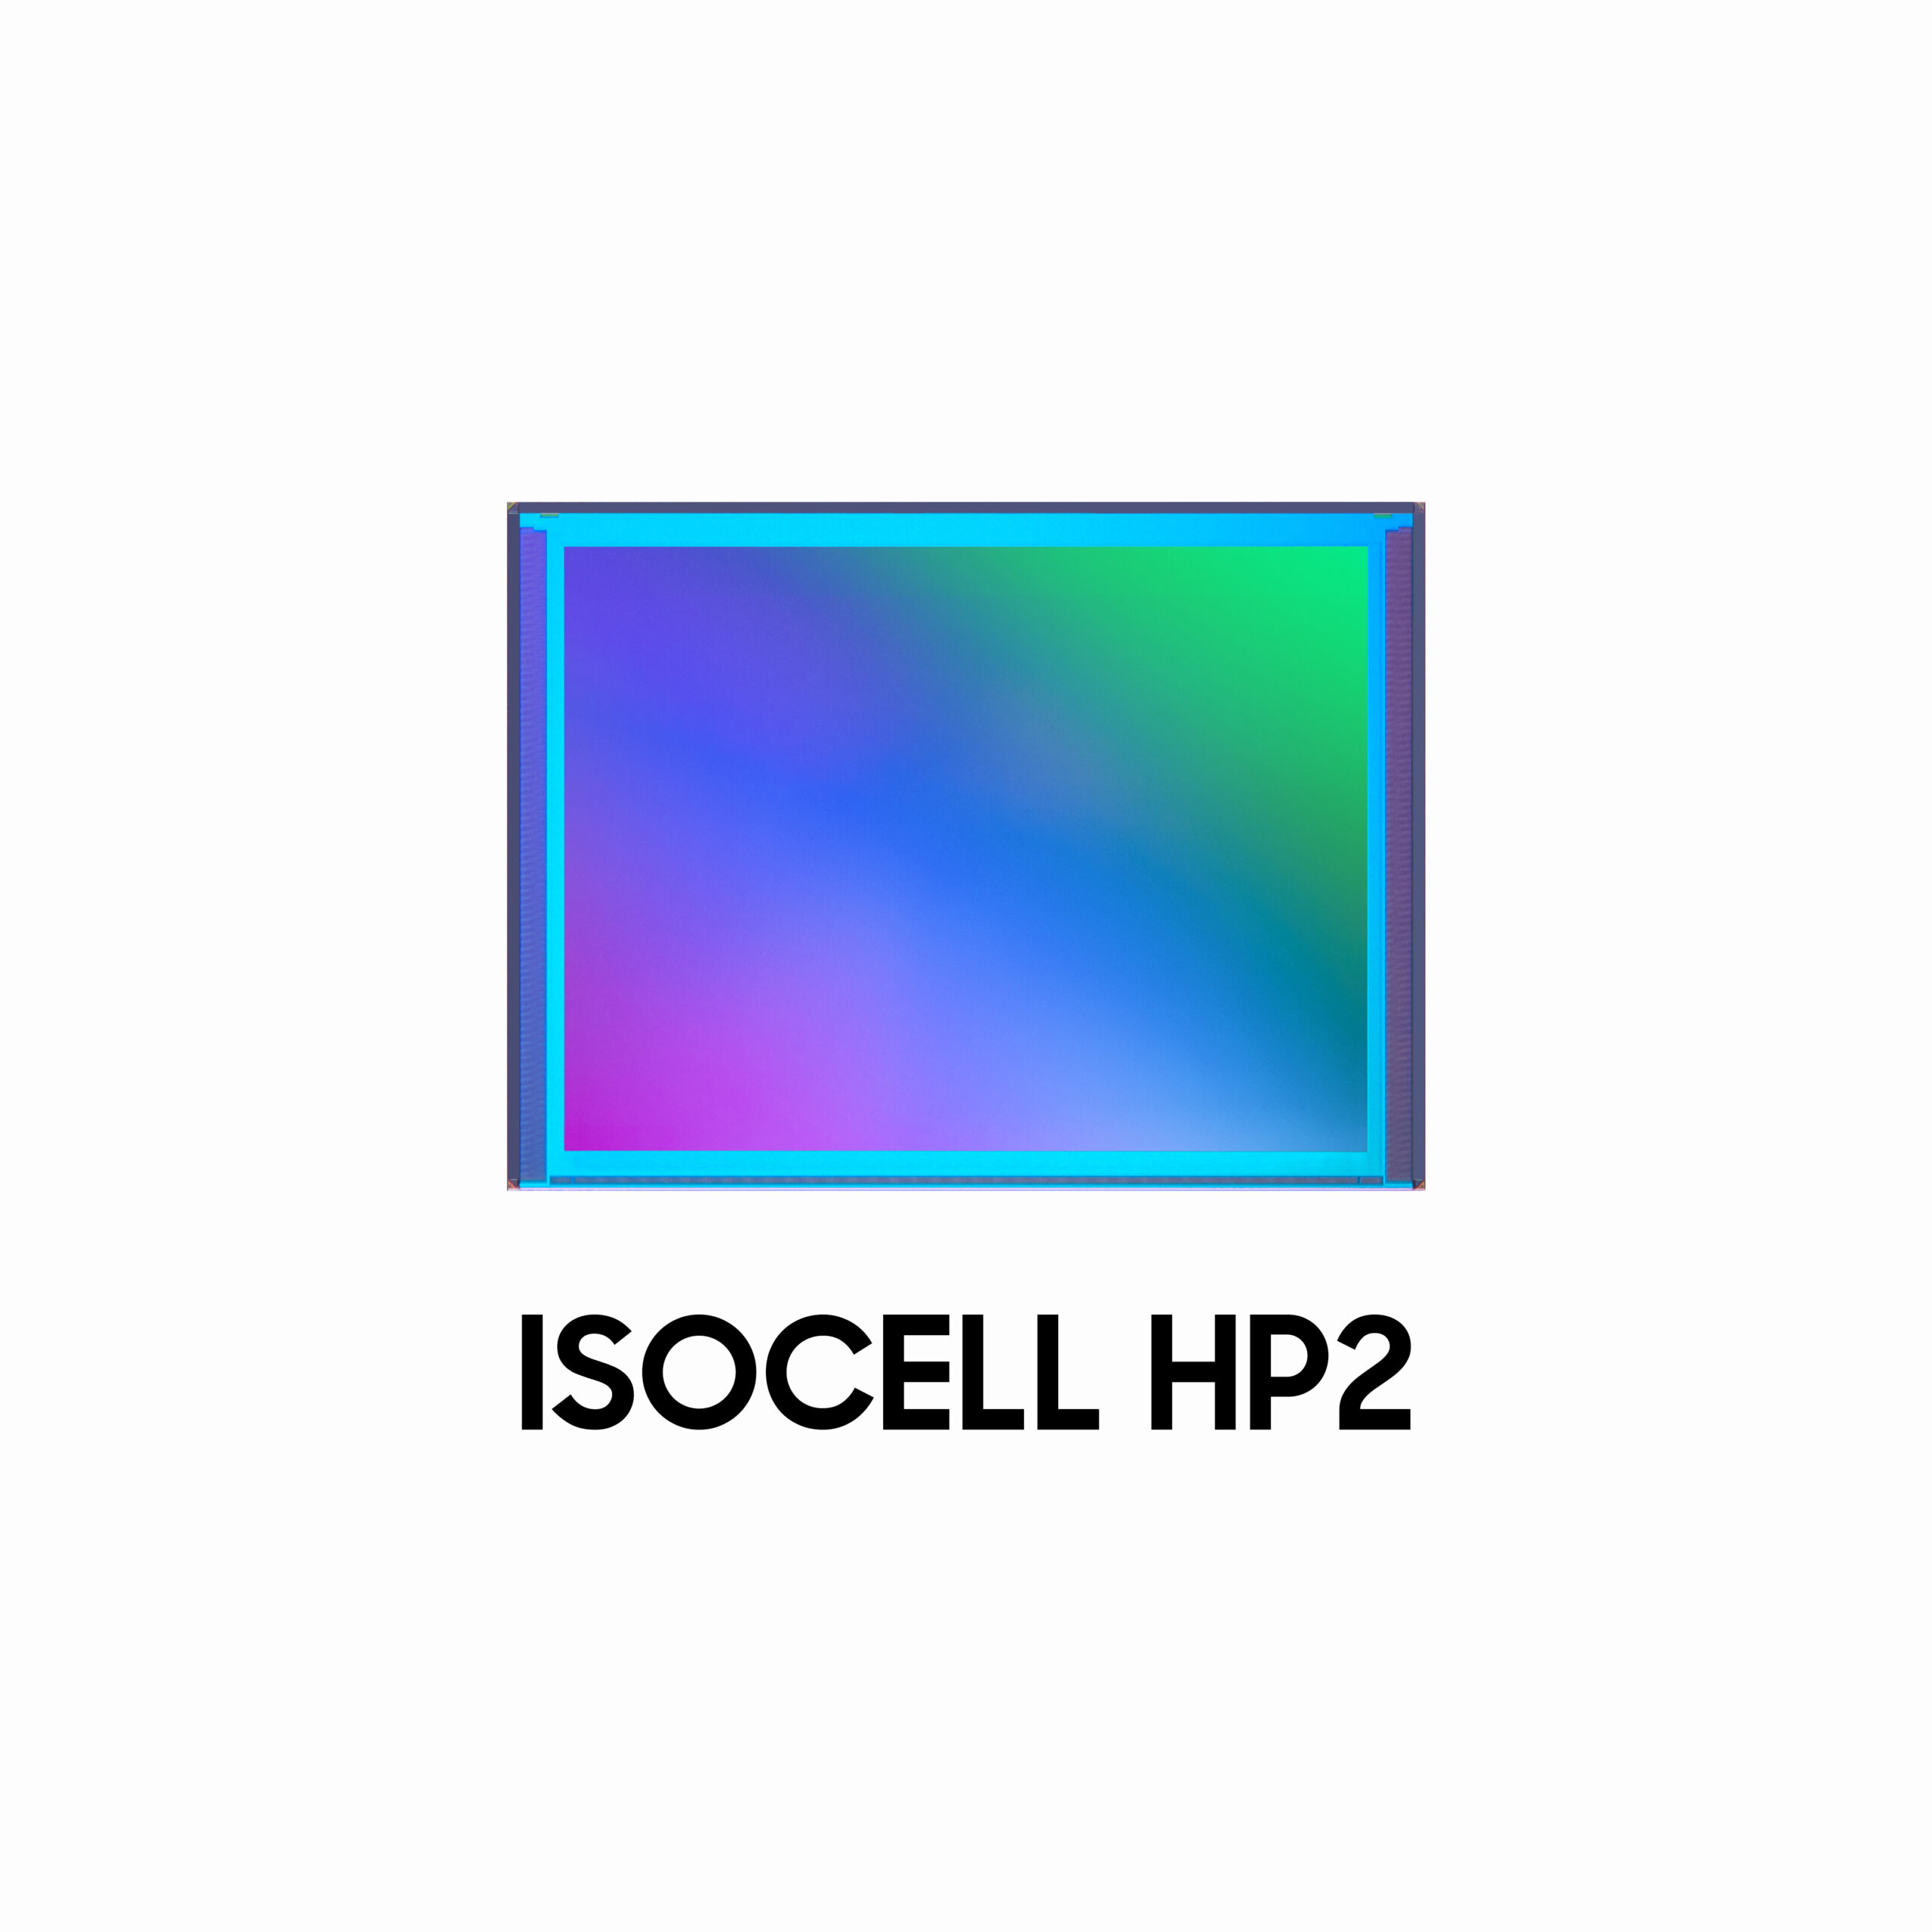 ISOCELL HP2 dl1 scaled